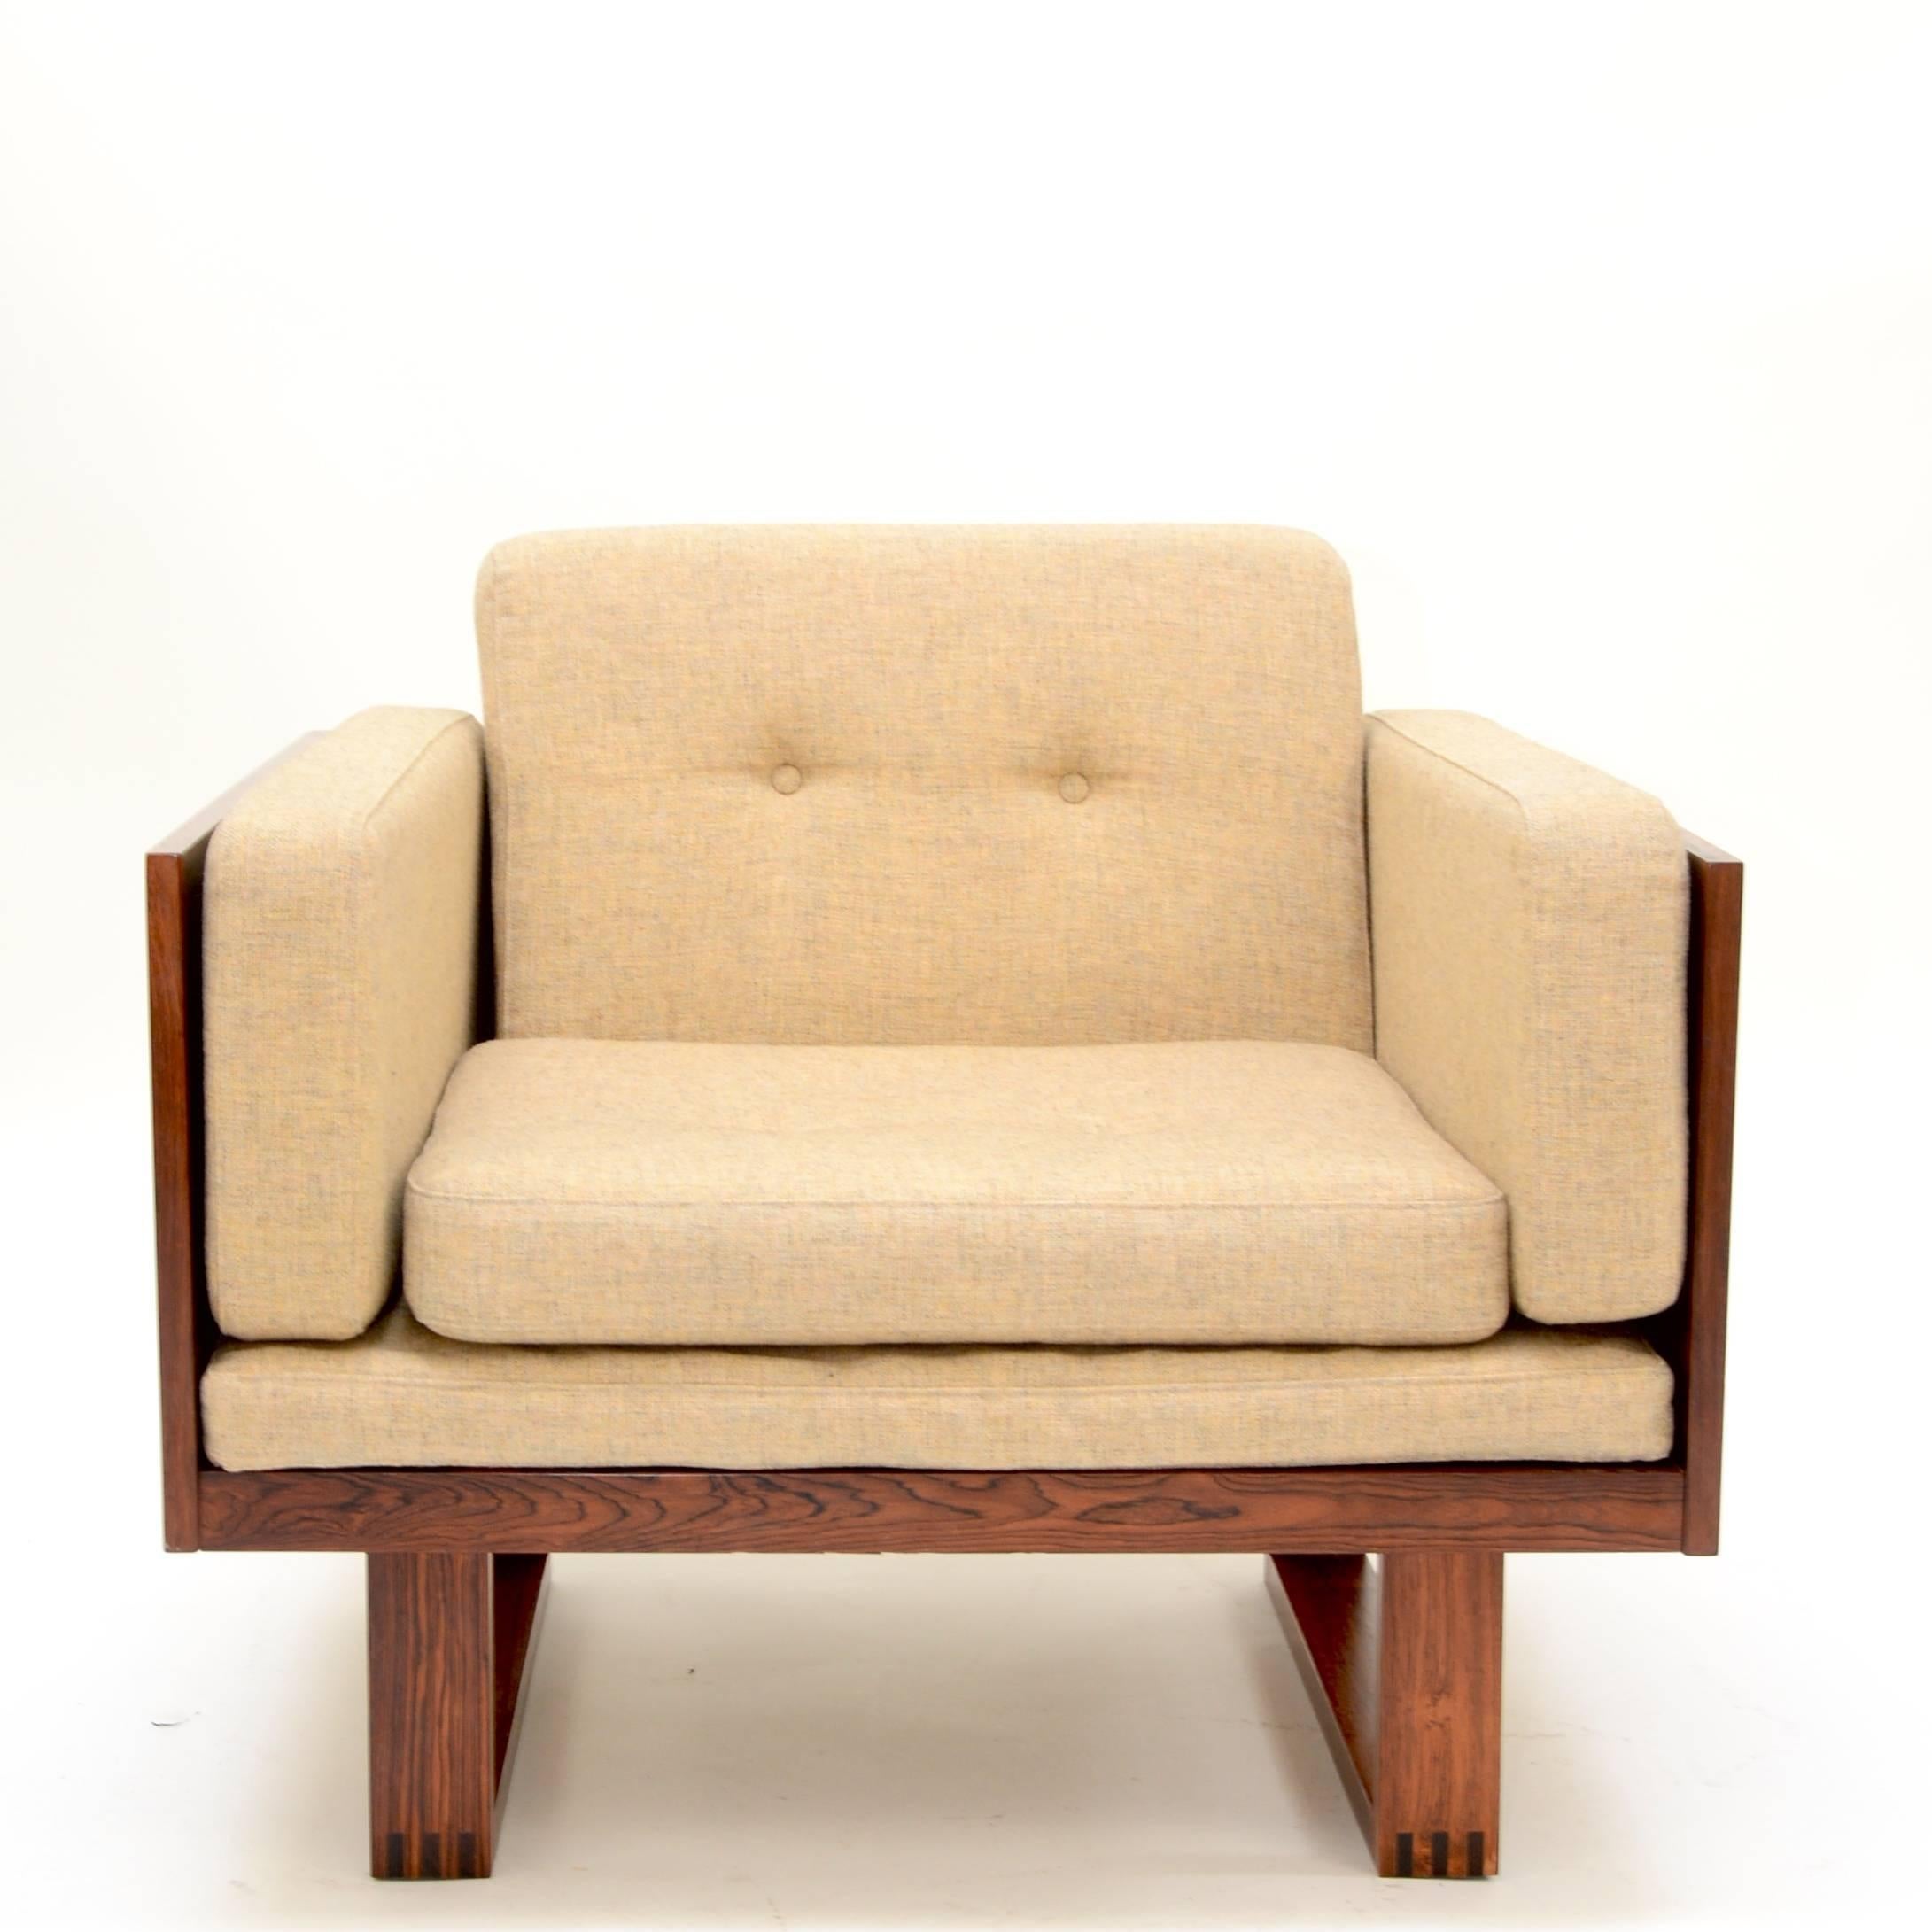 This is an amazing lounge chair by Poul Cadovius for France & Son, Denmark, 1960s. We also have the matching two-seat sofa pictured last. See additional listing for more information. 

This set is located at our Downtown Los Angeles location.